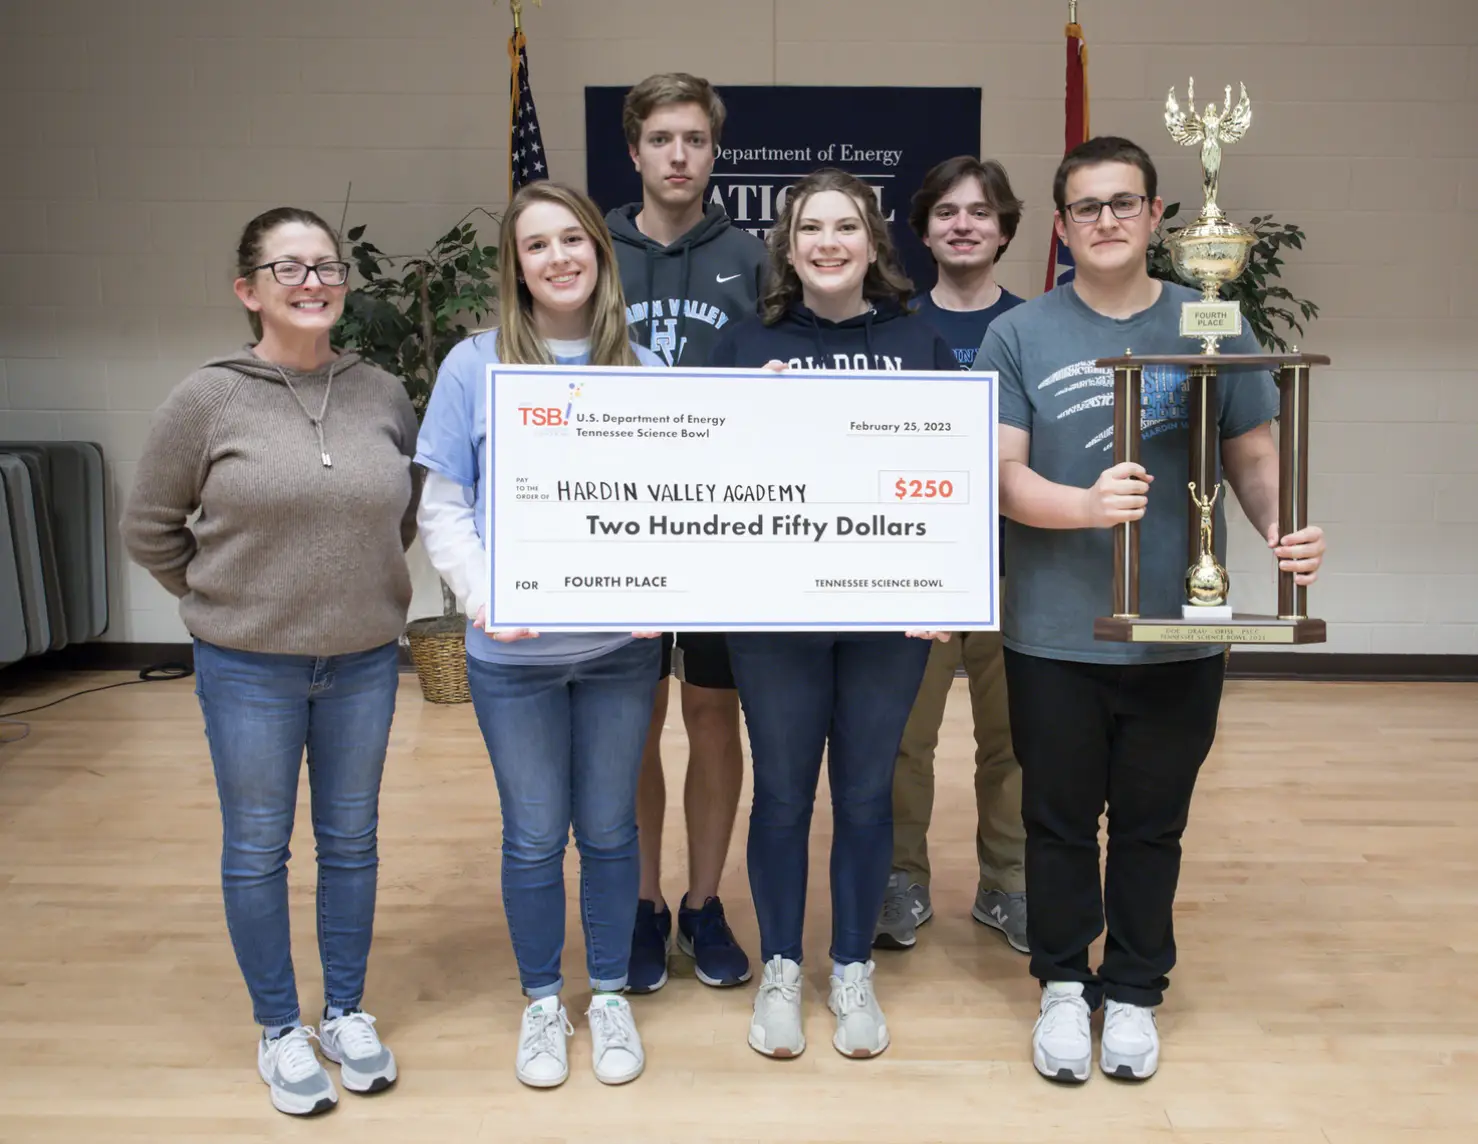 Tennessee Science Bowl fourth place - Hardin Valley Academy 